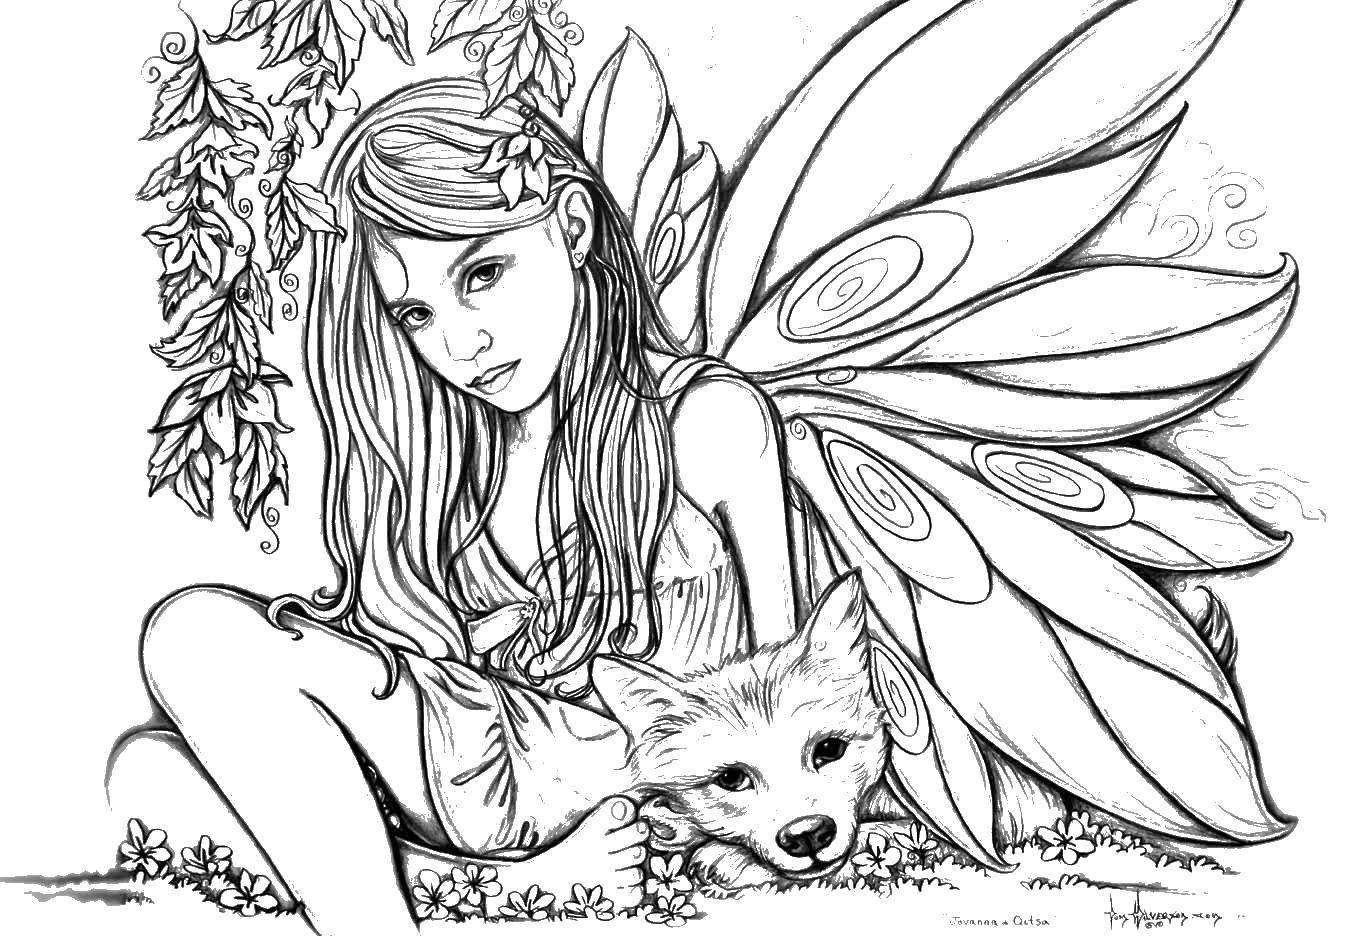 Coloring Fairy with wolf. Category coloring pages for teenagers. Tags:  vey, girl, wolf, wings.